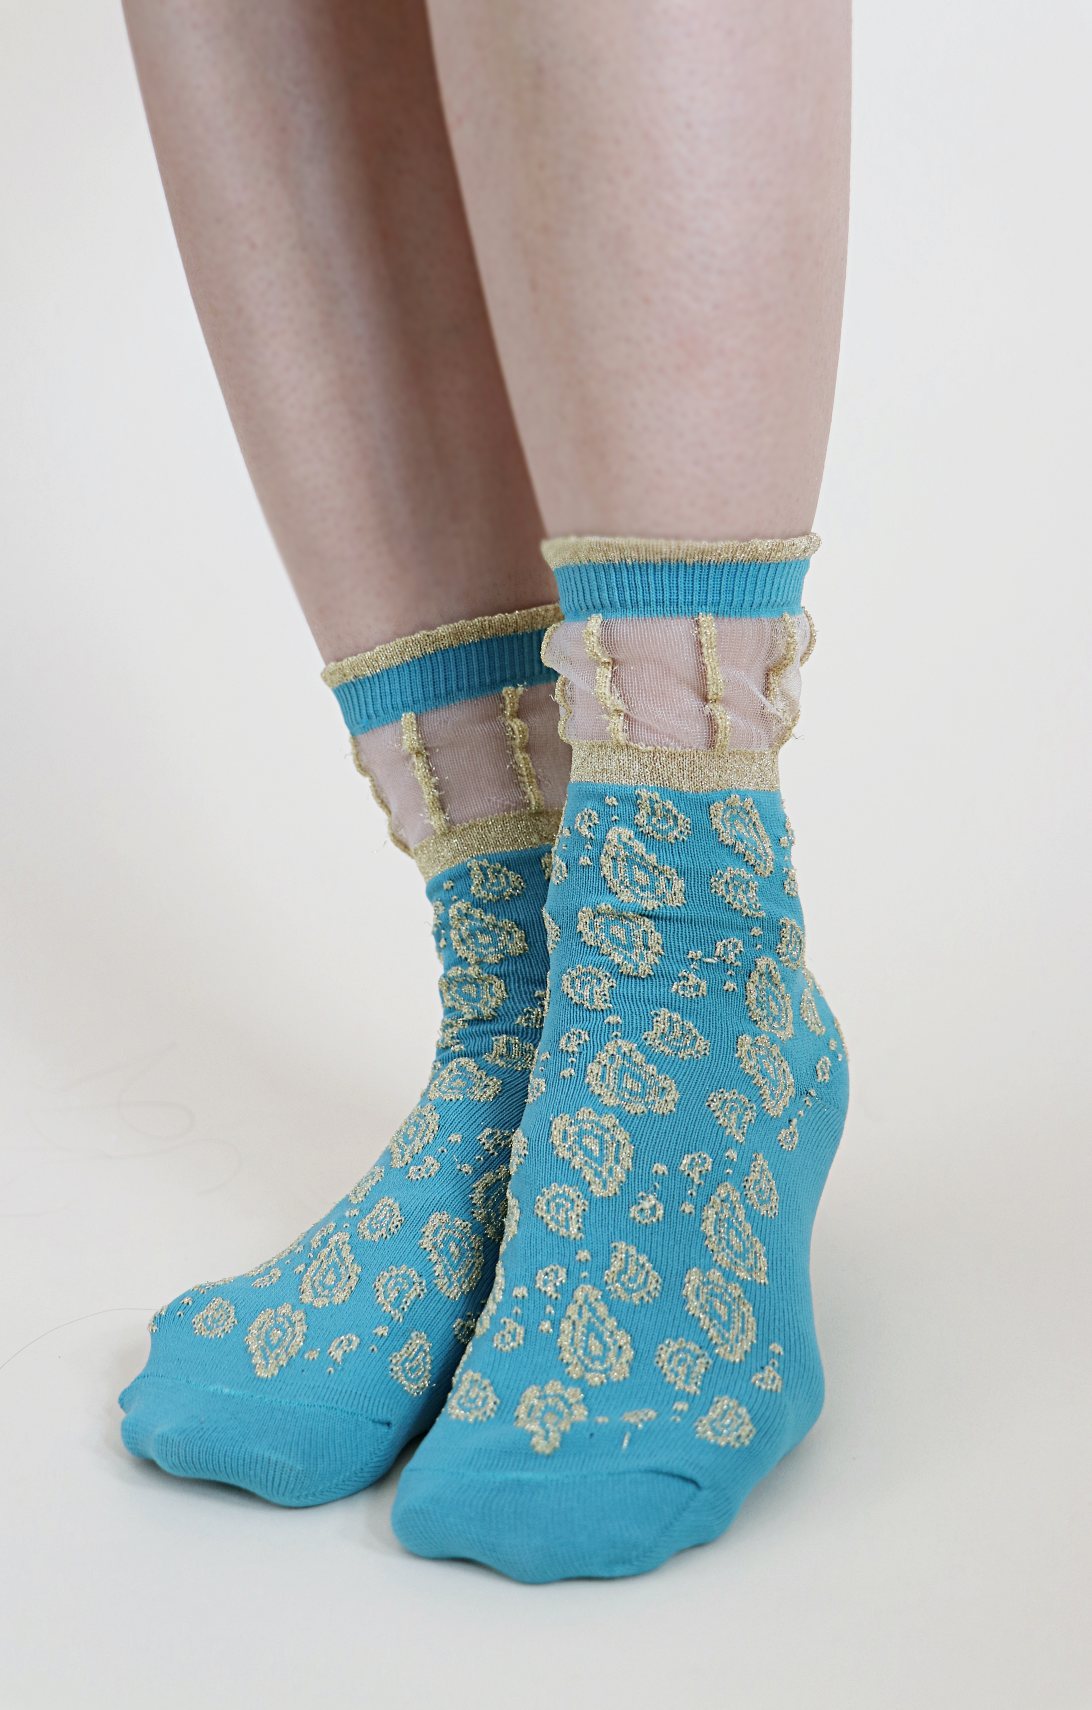 TABBISOCKS brand Golden Paisley Socks called PELORUS, light blue with gold Persian-like pattern embroidery